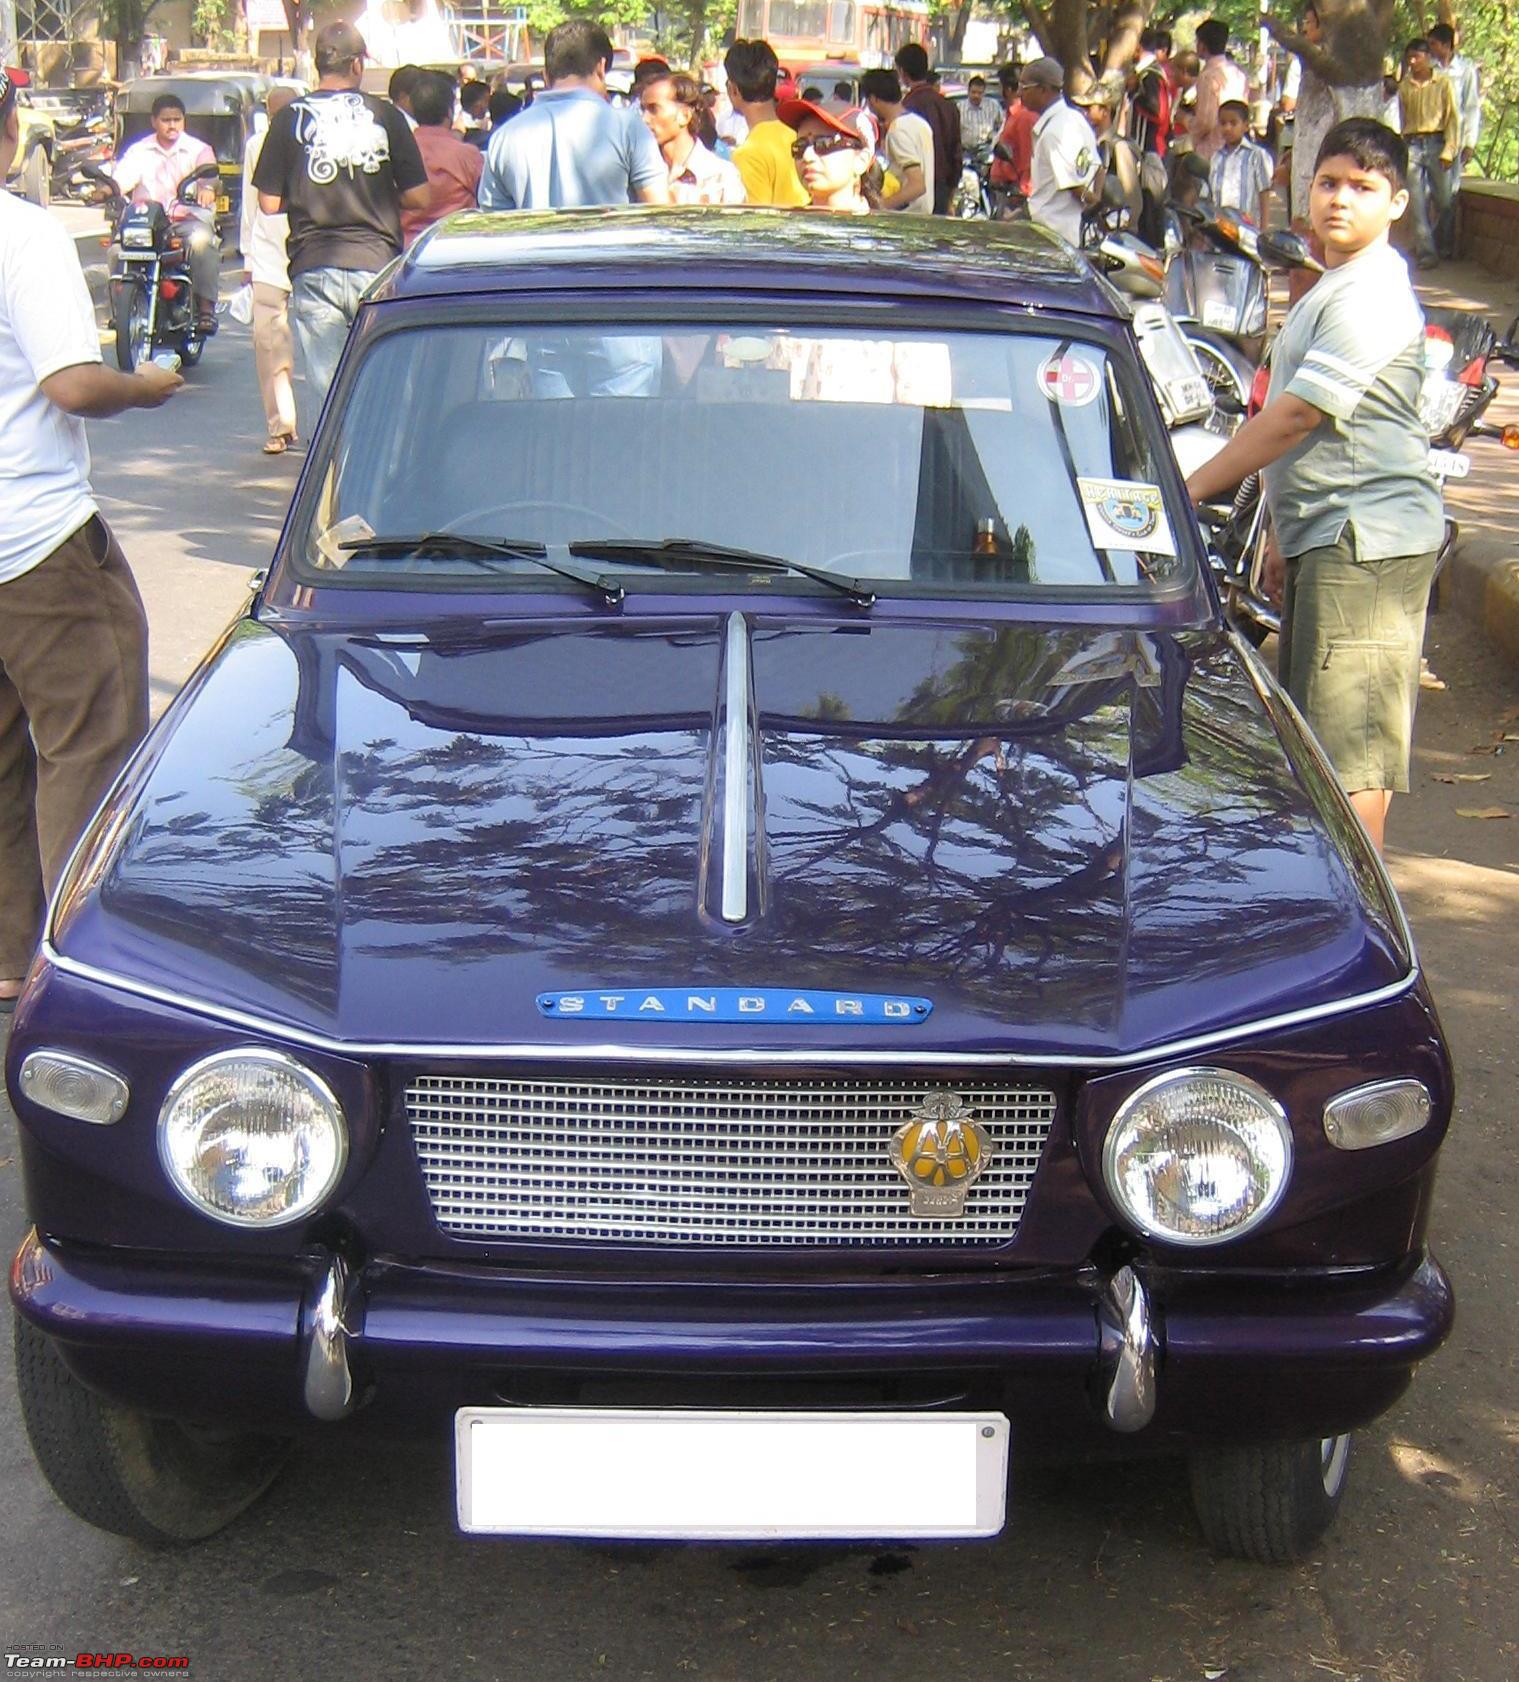 Standard cars in India